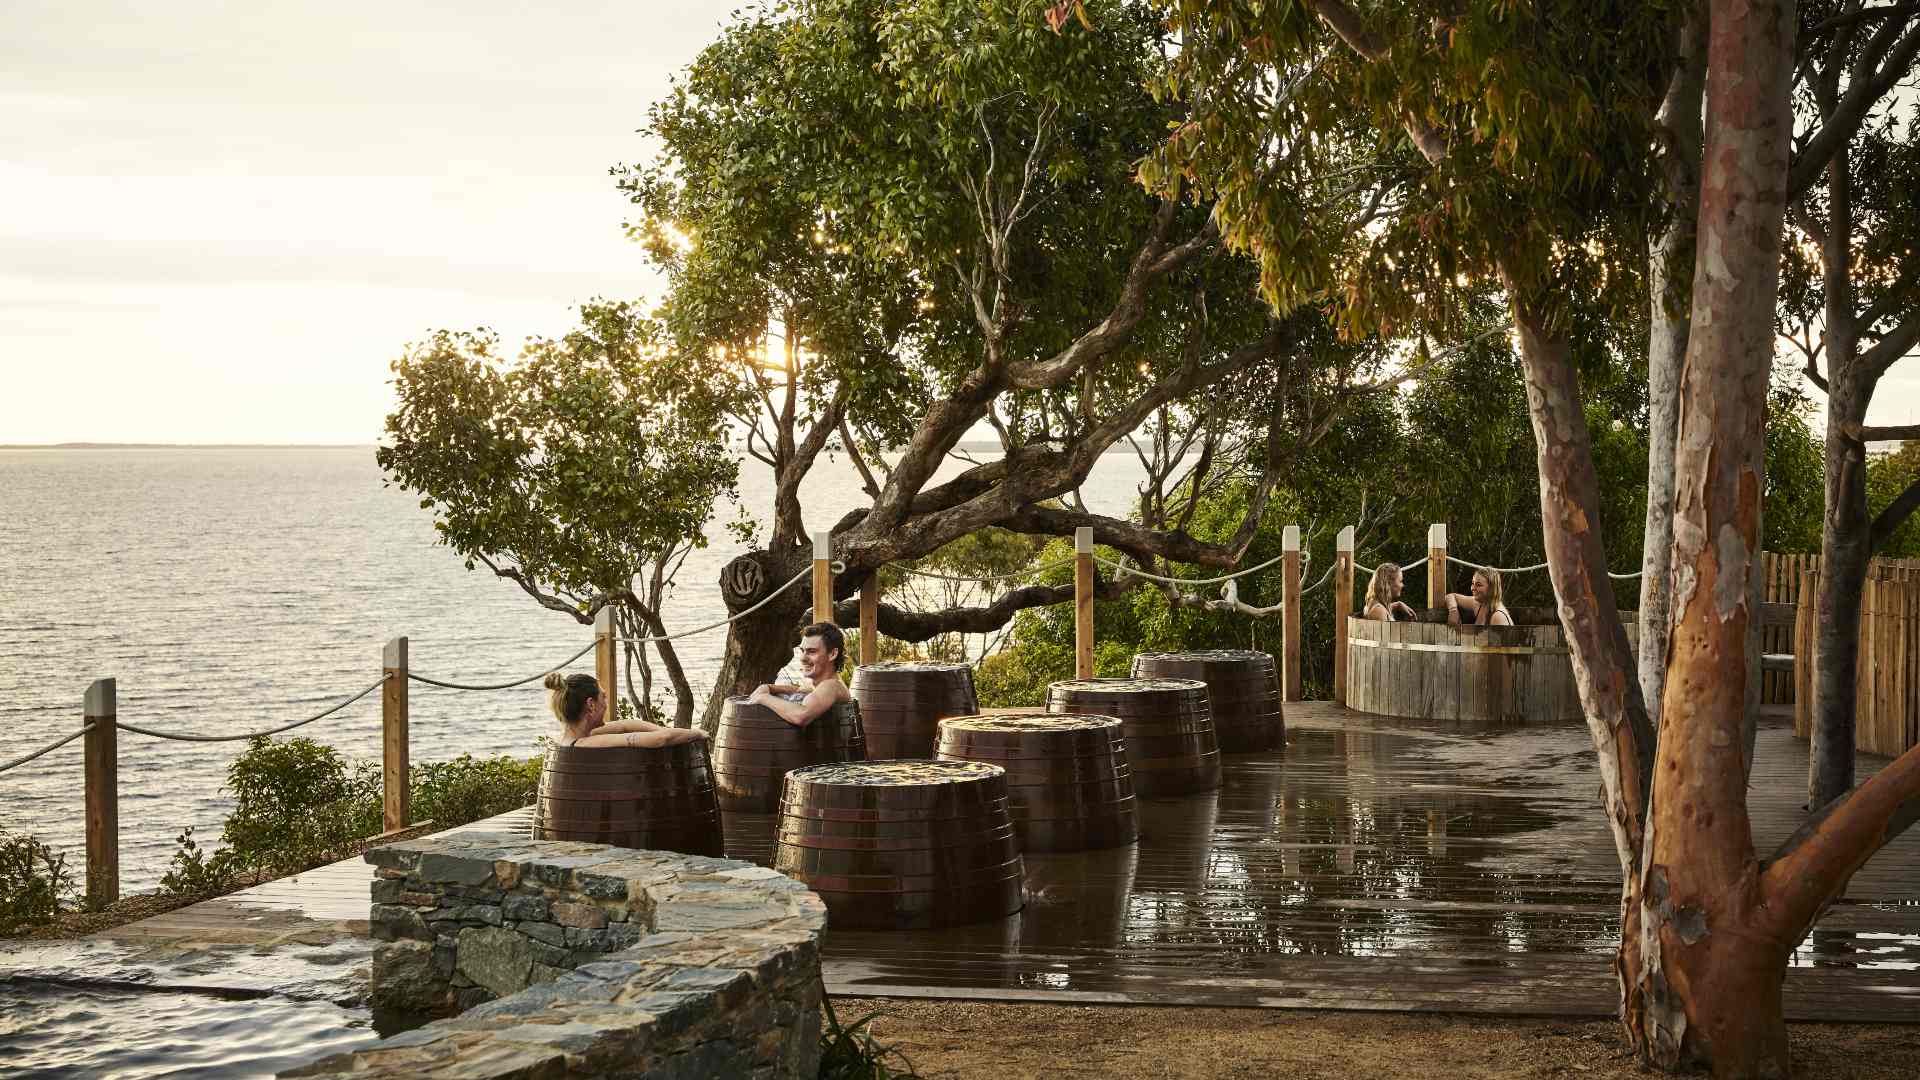 Now Open: Metung Hot Springs Is Finally Here If You're Due for an Indulgent Gippsland Getaway